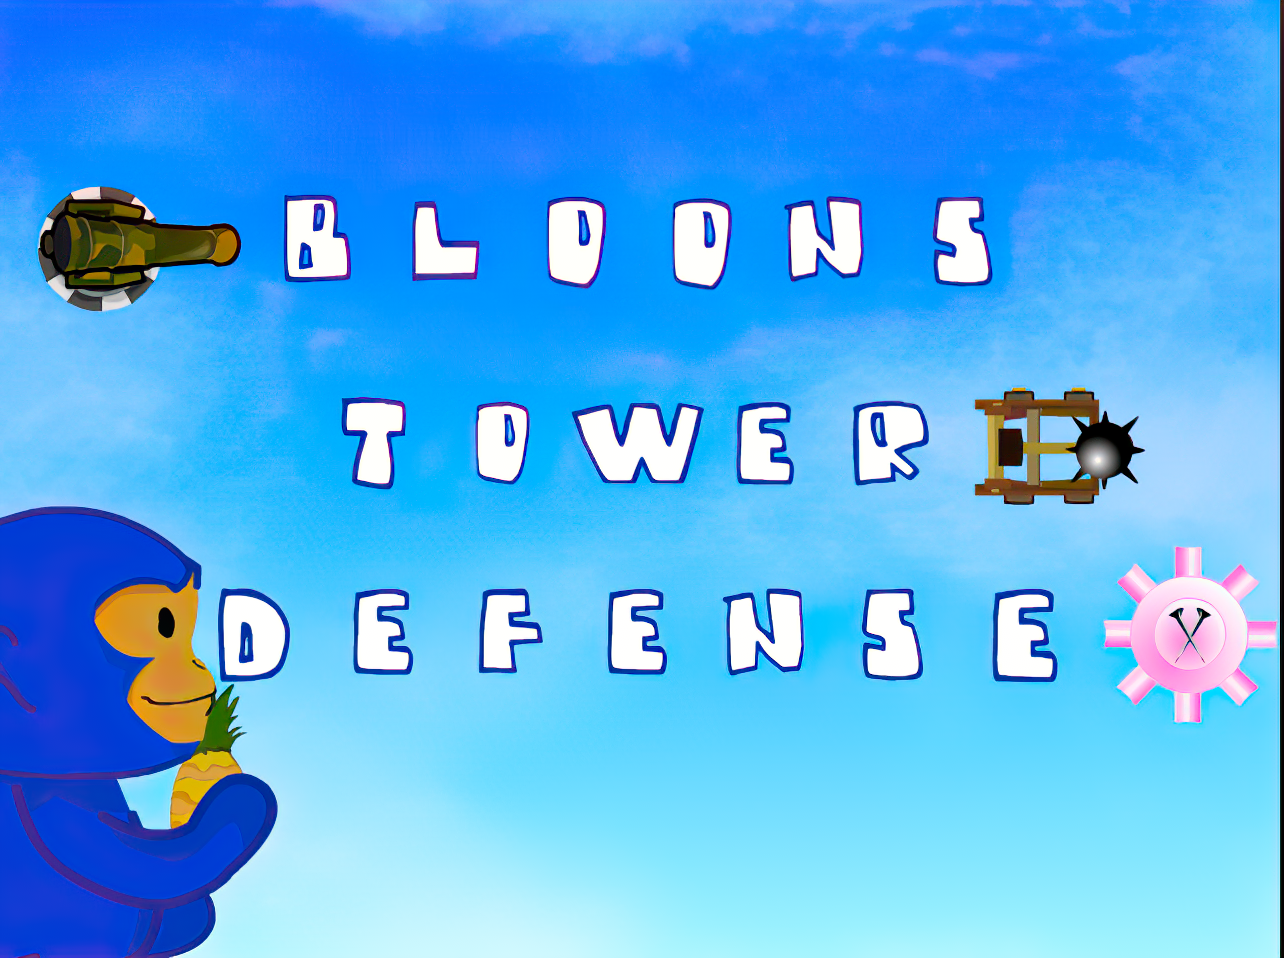 Play Online Bloons tower defense 4 Game At Unblocked Games